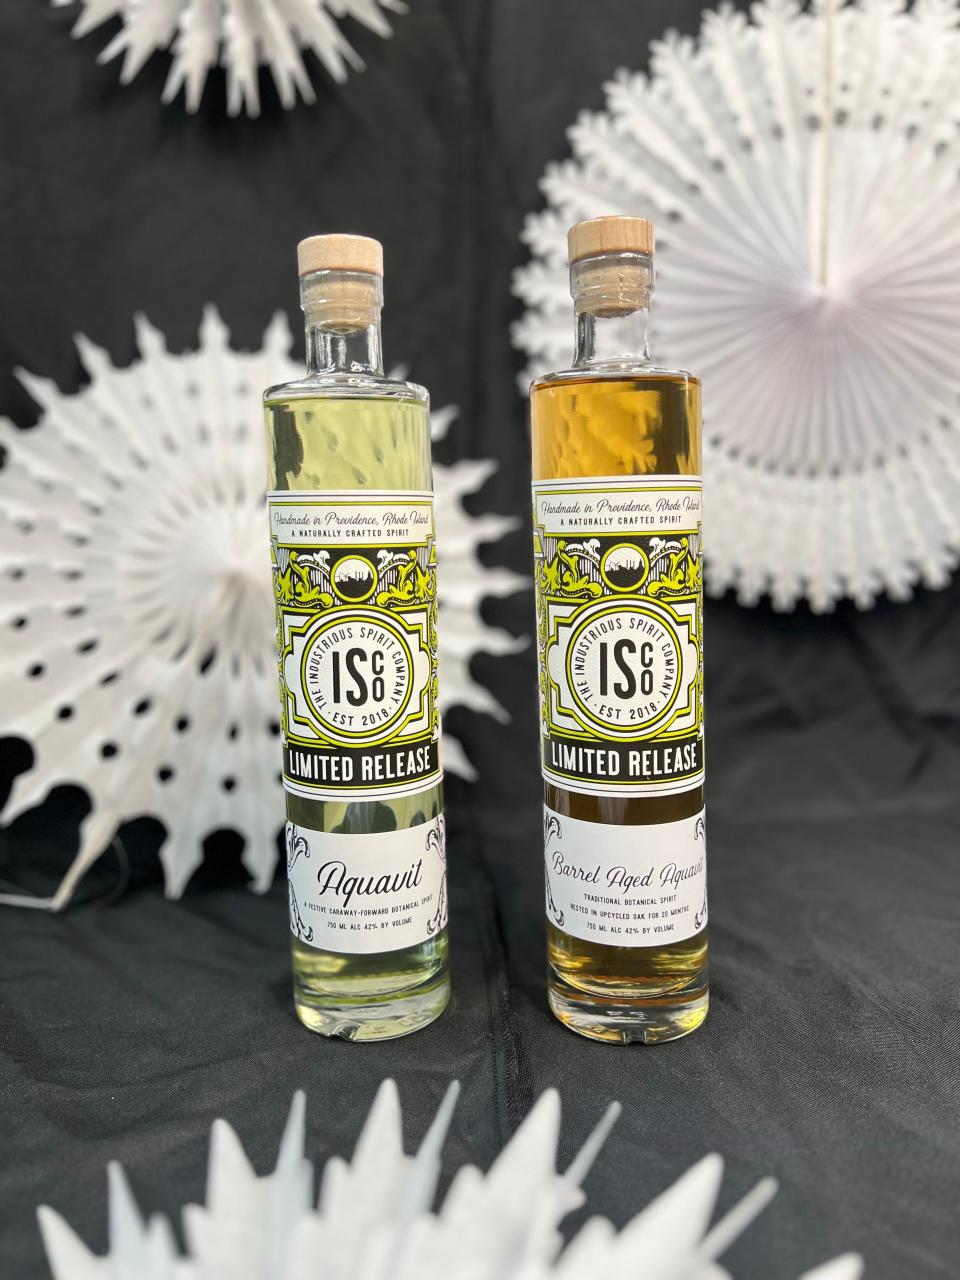 Aquavit is the newest release from Providence's Industrious Spirit Company. They also have a barrel-aged version.